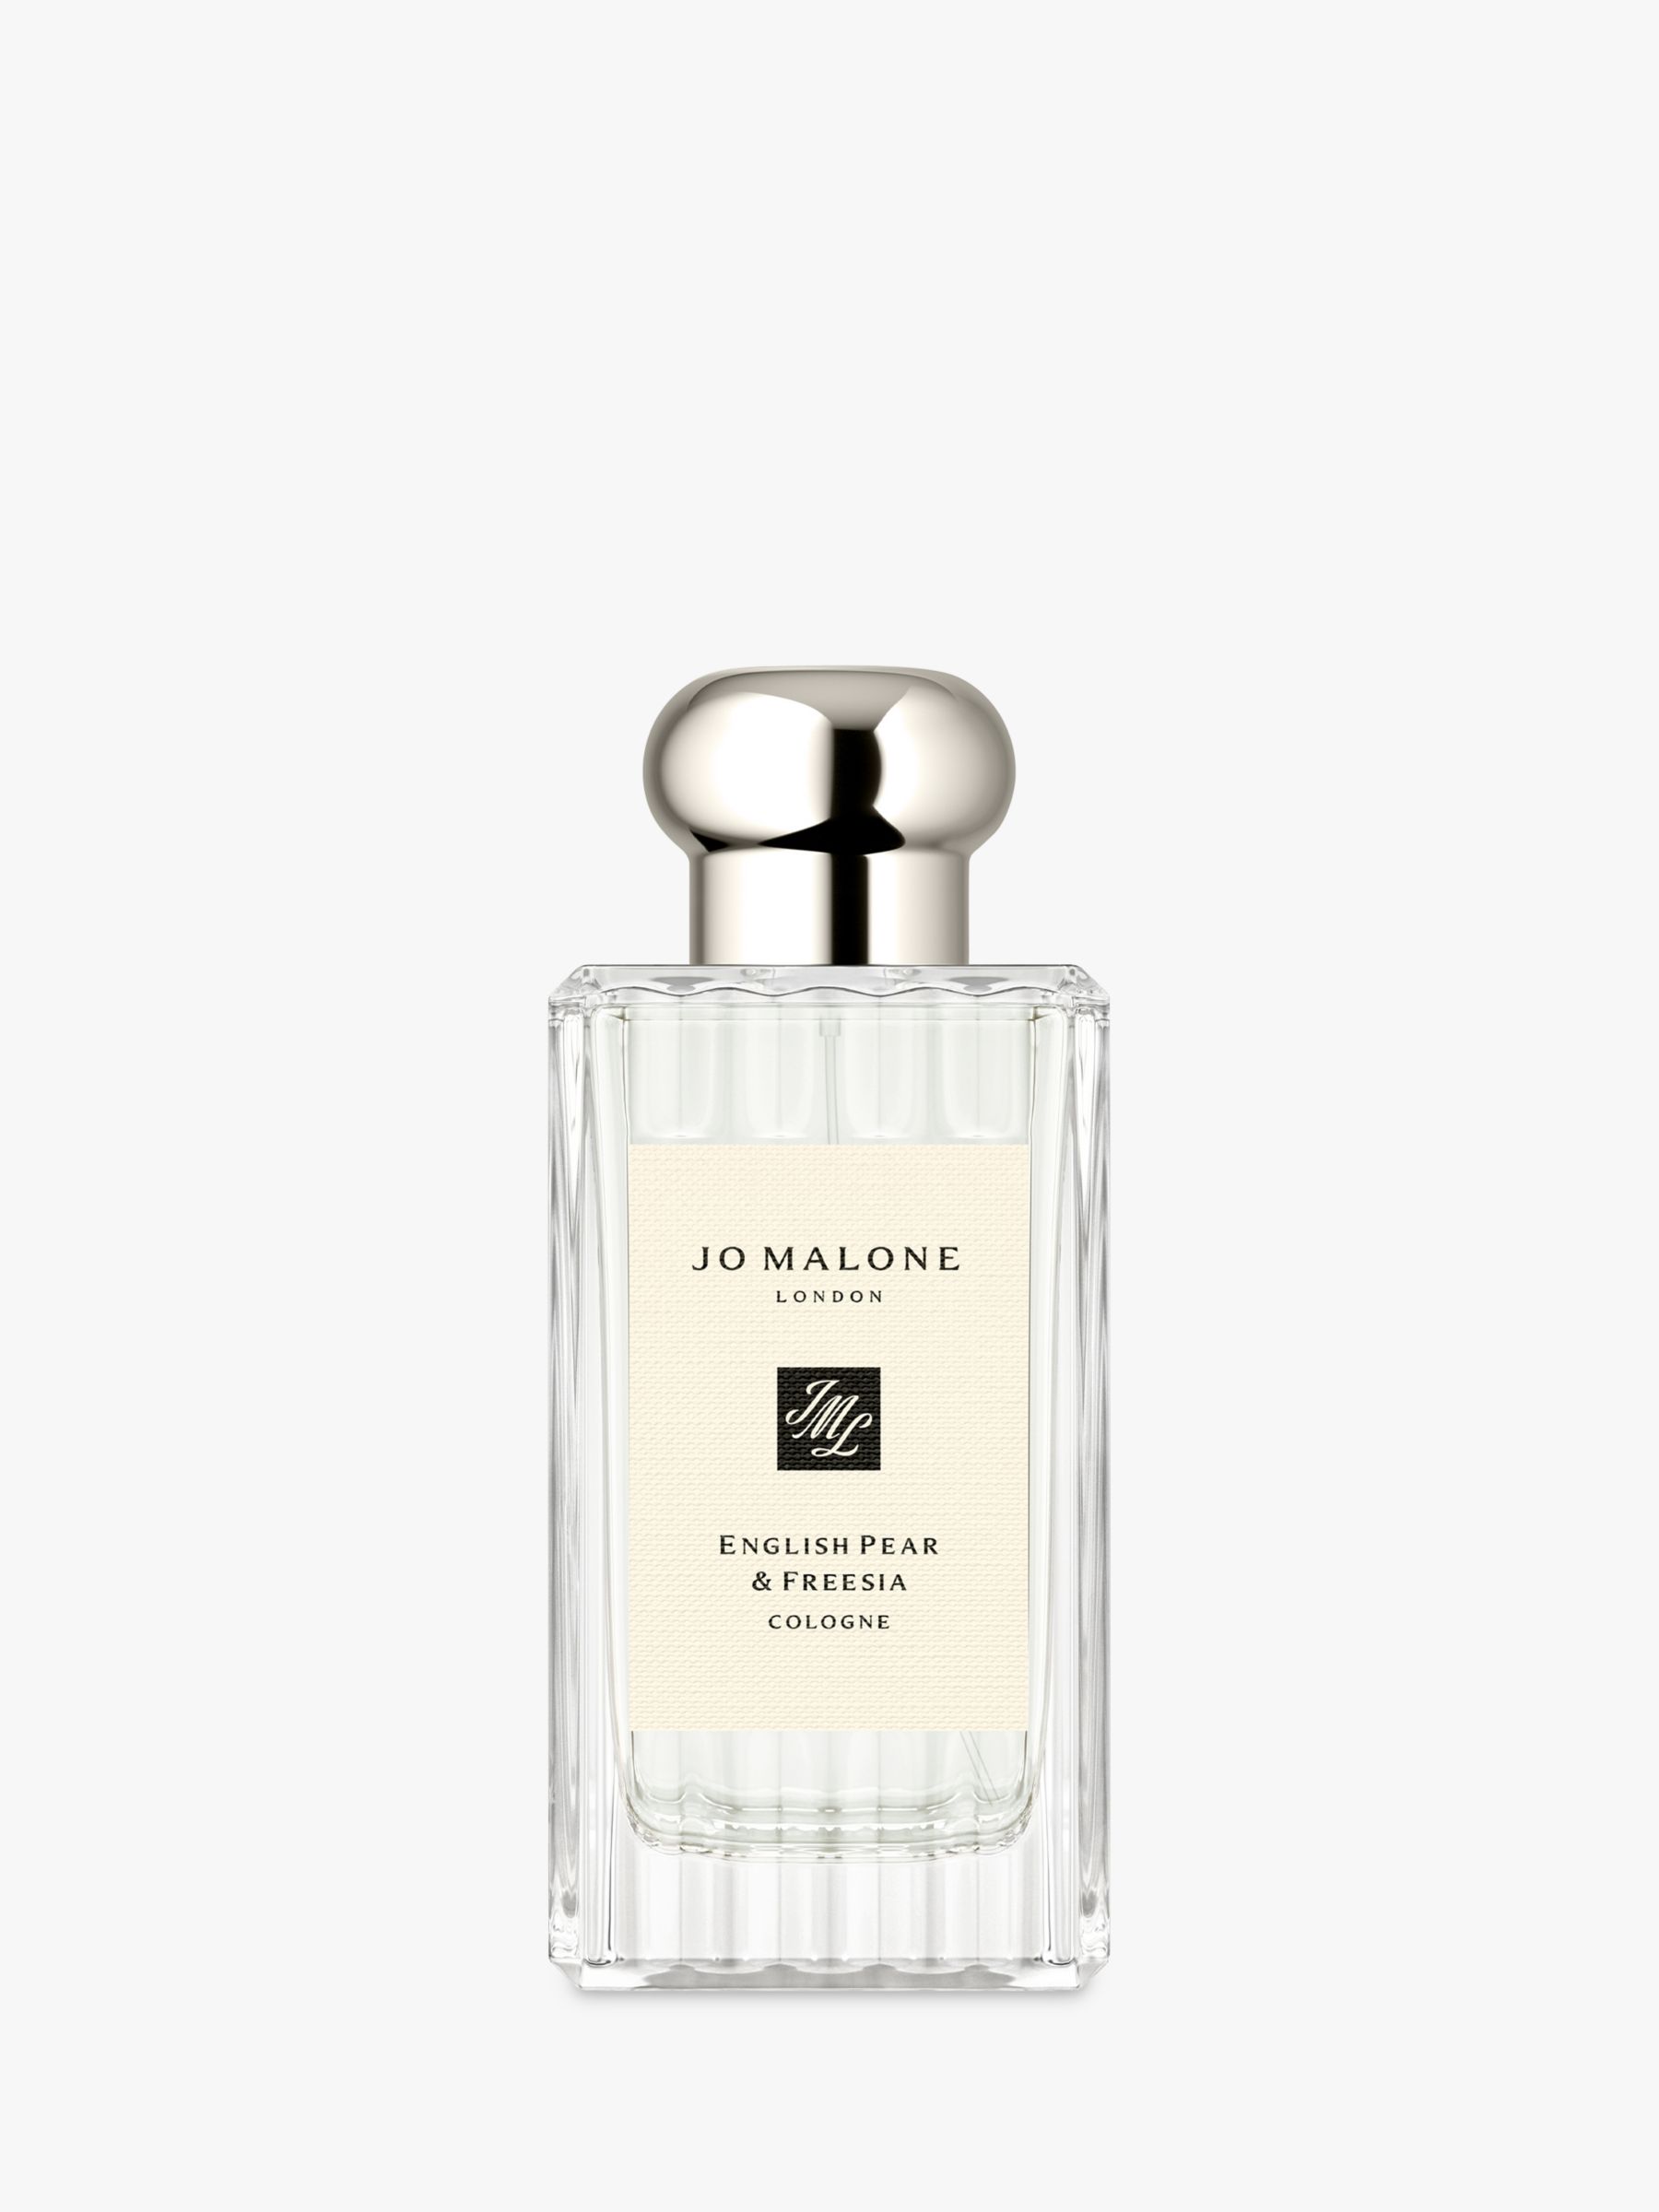 Jo Malone London English Pear & Freesia Cologne Fluted Special Edition, 100ml 1